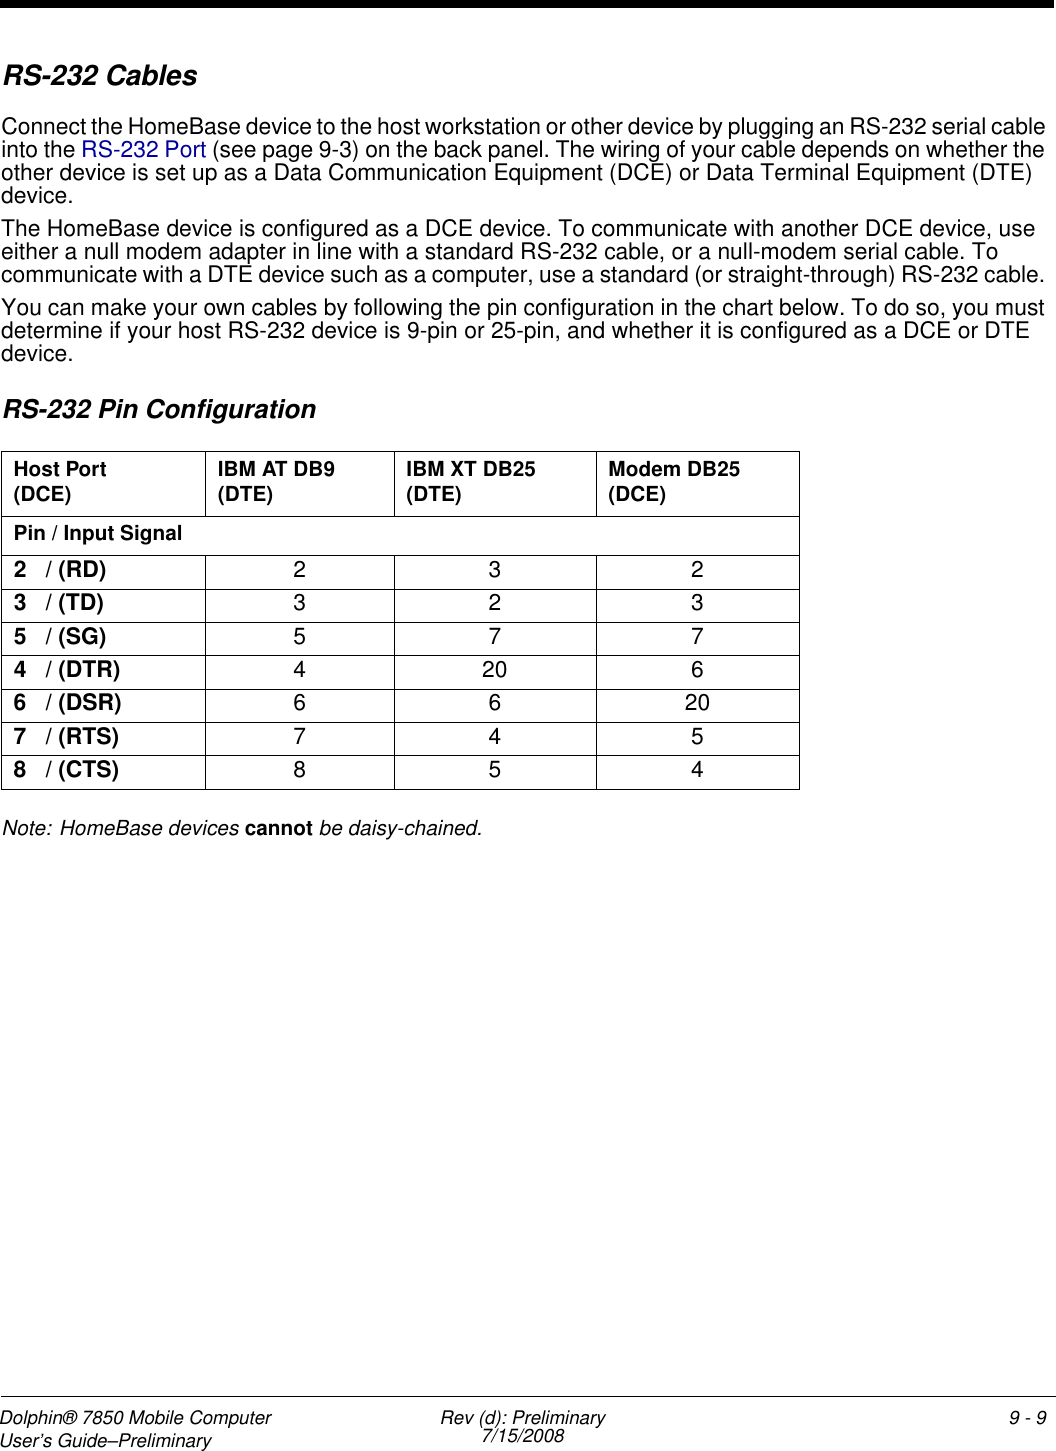 Dolphin® 7850 Mobile Computer  User’s Guide–Preliminary  Rev (d): Preliminary7/15/2008 9 - 9RS-232 CablesConnect the HomeBase device to the host workstation or other device by plugging an RS-232 serial cable into the RS-232 Port (see page 9-3) on the back panel. The wiring of your cable depends on whether the other device is set up as a Data Communication Equipment (DCE) or Data Terminal Equipment (DTE) device. The HomeBase device is configured as a DCE device. To communicate with another DCE device, use either a null modem adapter in line with a standard RS-232 cable, or a null-modem serial cable. To communicate with a DTE device such as a computer, use a standard (or straight-through) RS-232 cable. You can make your own cables by following the pin configuration in the chart below. To do so, you must determine if your host RS-232 device is 9-pin or 25-pin, and whether it is configured as a DCE or DTE device.RS-232 Pin ConfigurationNote: HomeBase devices cannot be daisy-chained.Host Port (DCE) IBM AT DB9 (DTE) IBM XT DB25 (DTE) Modem DB25 (DCE)Pin / Input Signal2   / (RD) 23 23   / (TD) 32 35   / (SG) 57 74   / (DTR) 420 66   / (DSR) 66207   / (RTS) 74 58   / (CTS) 85 4